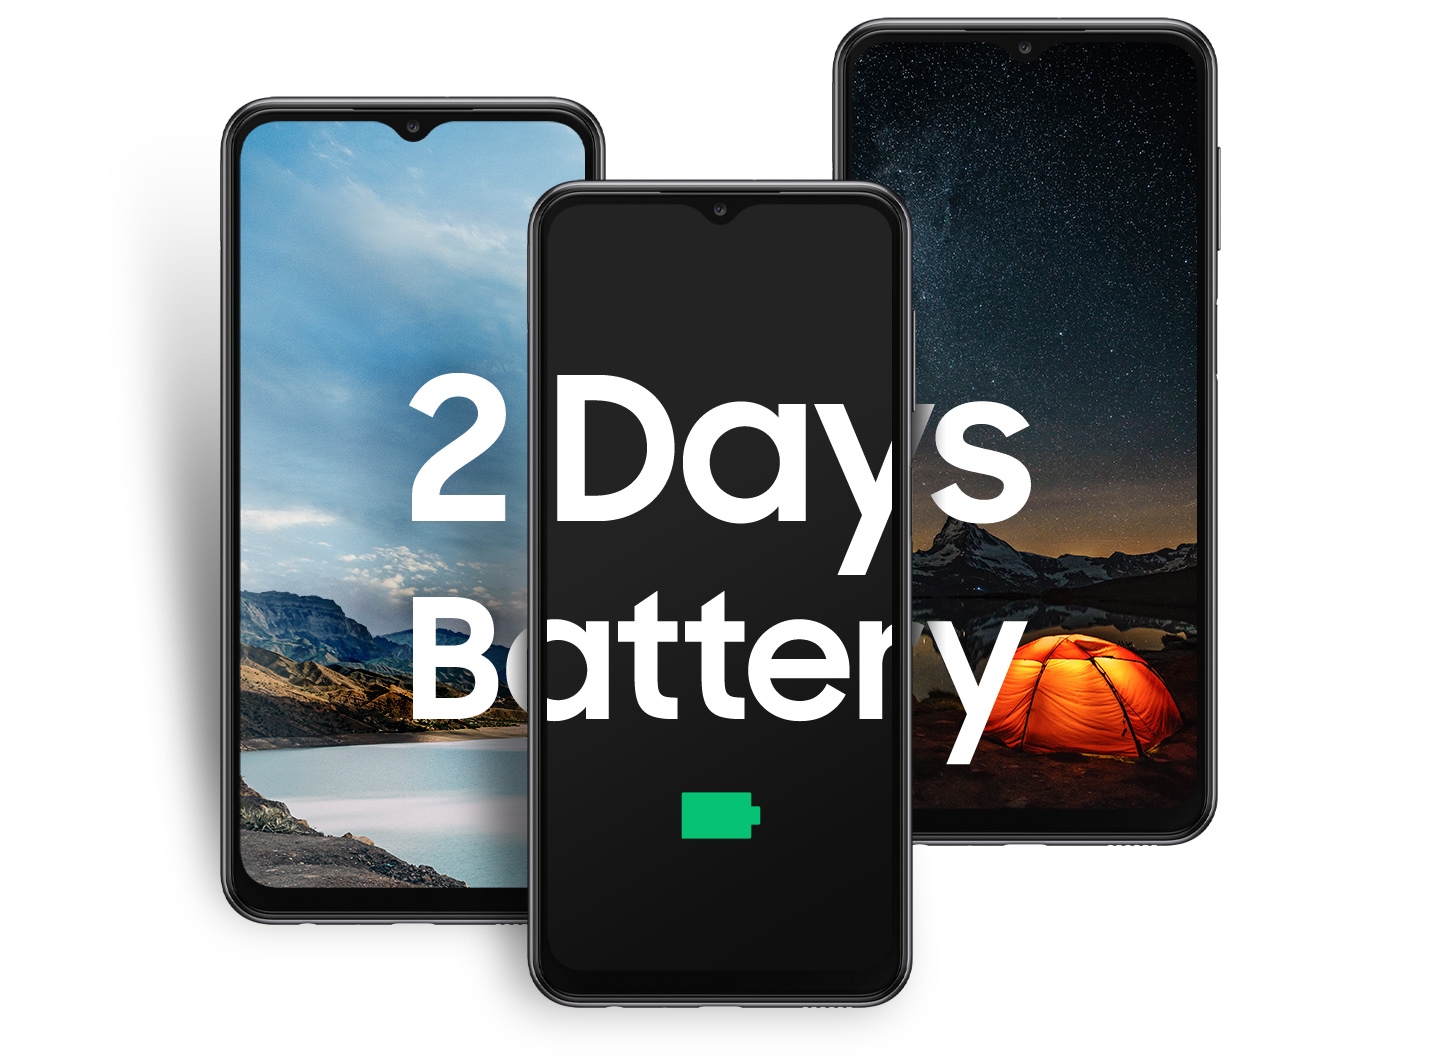 Meet Samsung Galaxy A23 with a 2-days last battery. Stay ahead of the day with a battery that won't slow you down during the day. The Galaxy A23 is placed between two landscape images